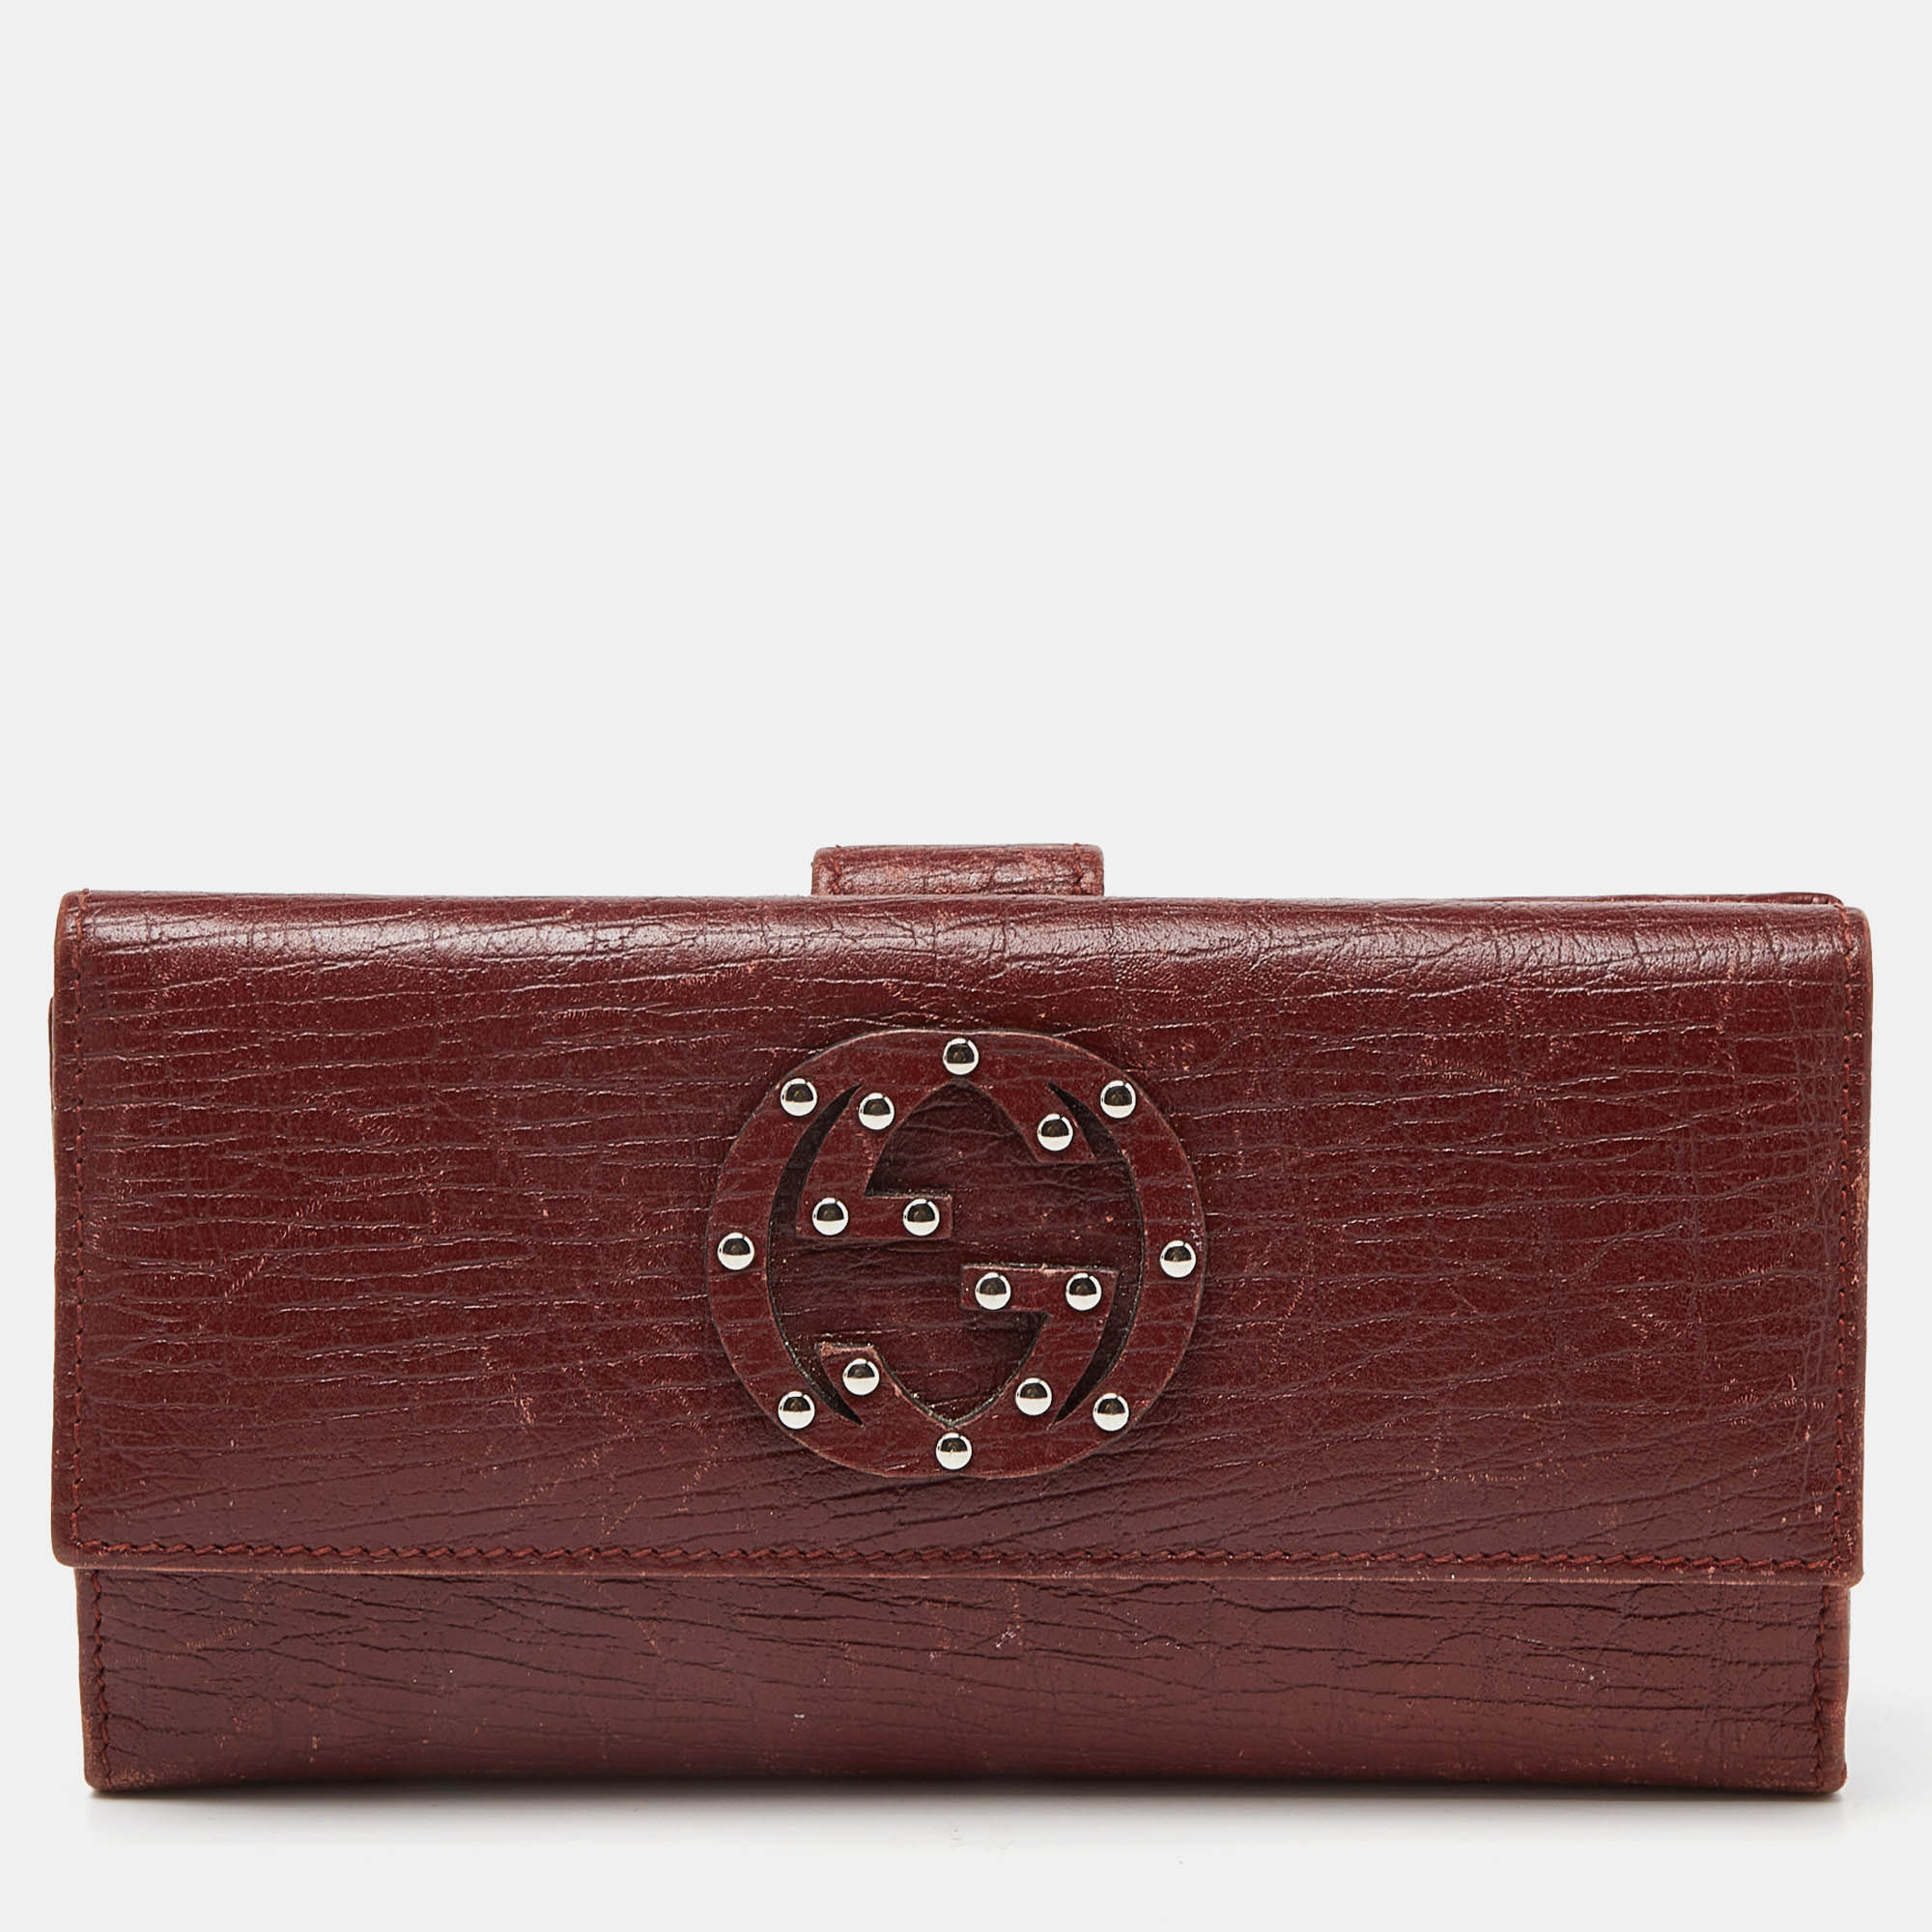 

Gucci Brick Leather Soho Studded Continental Wallet, Brown